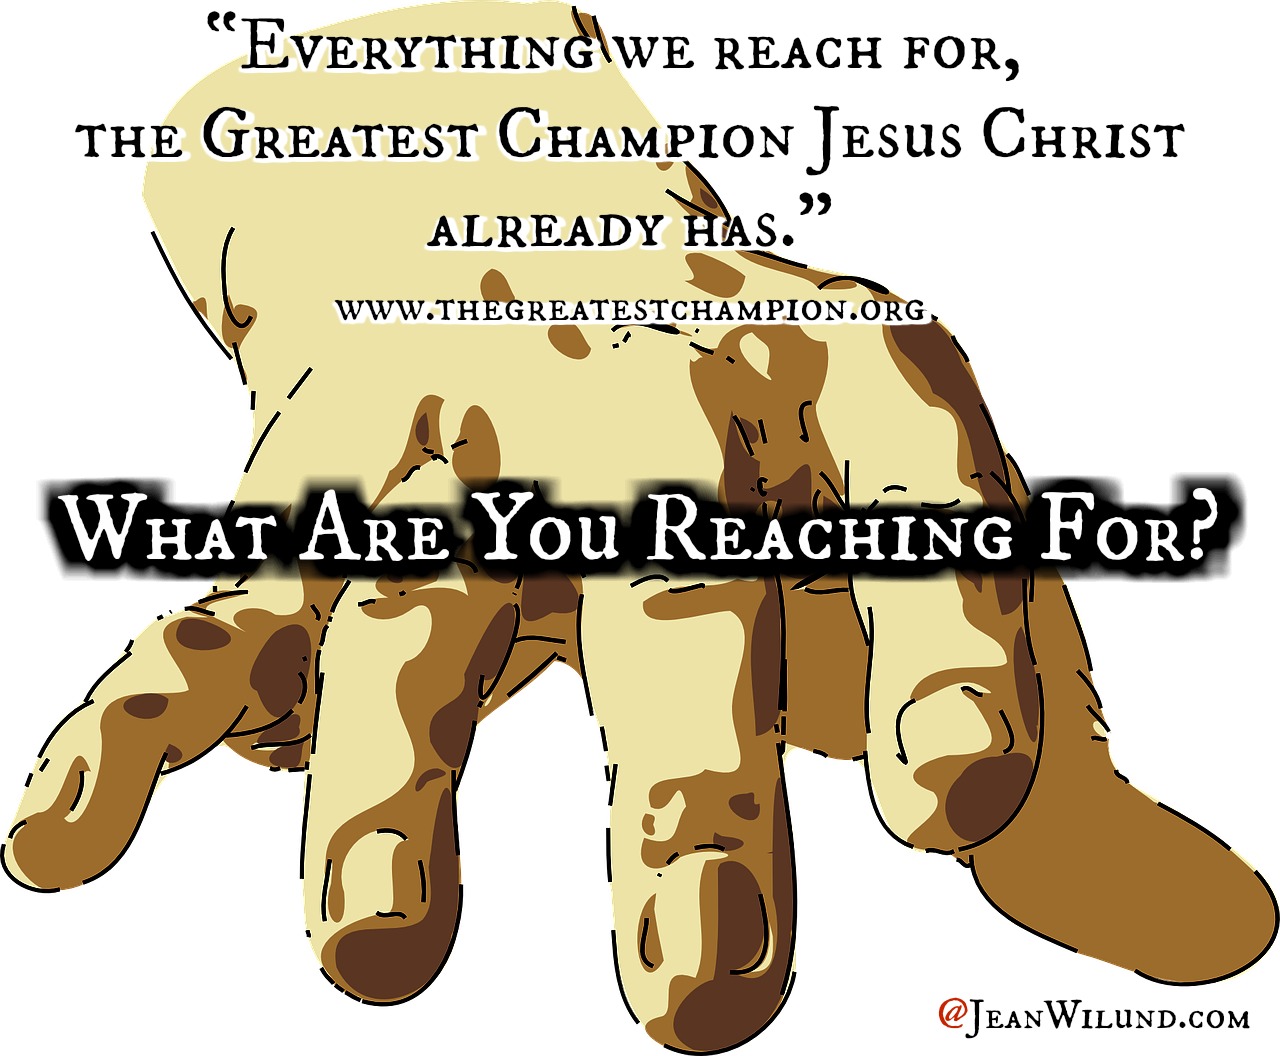 What are you reaching for? Everything we reach for, the Greatest Champion Jesus Christ already has." (www.thegreatestchampion.org) via www.JeanWilund.com